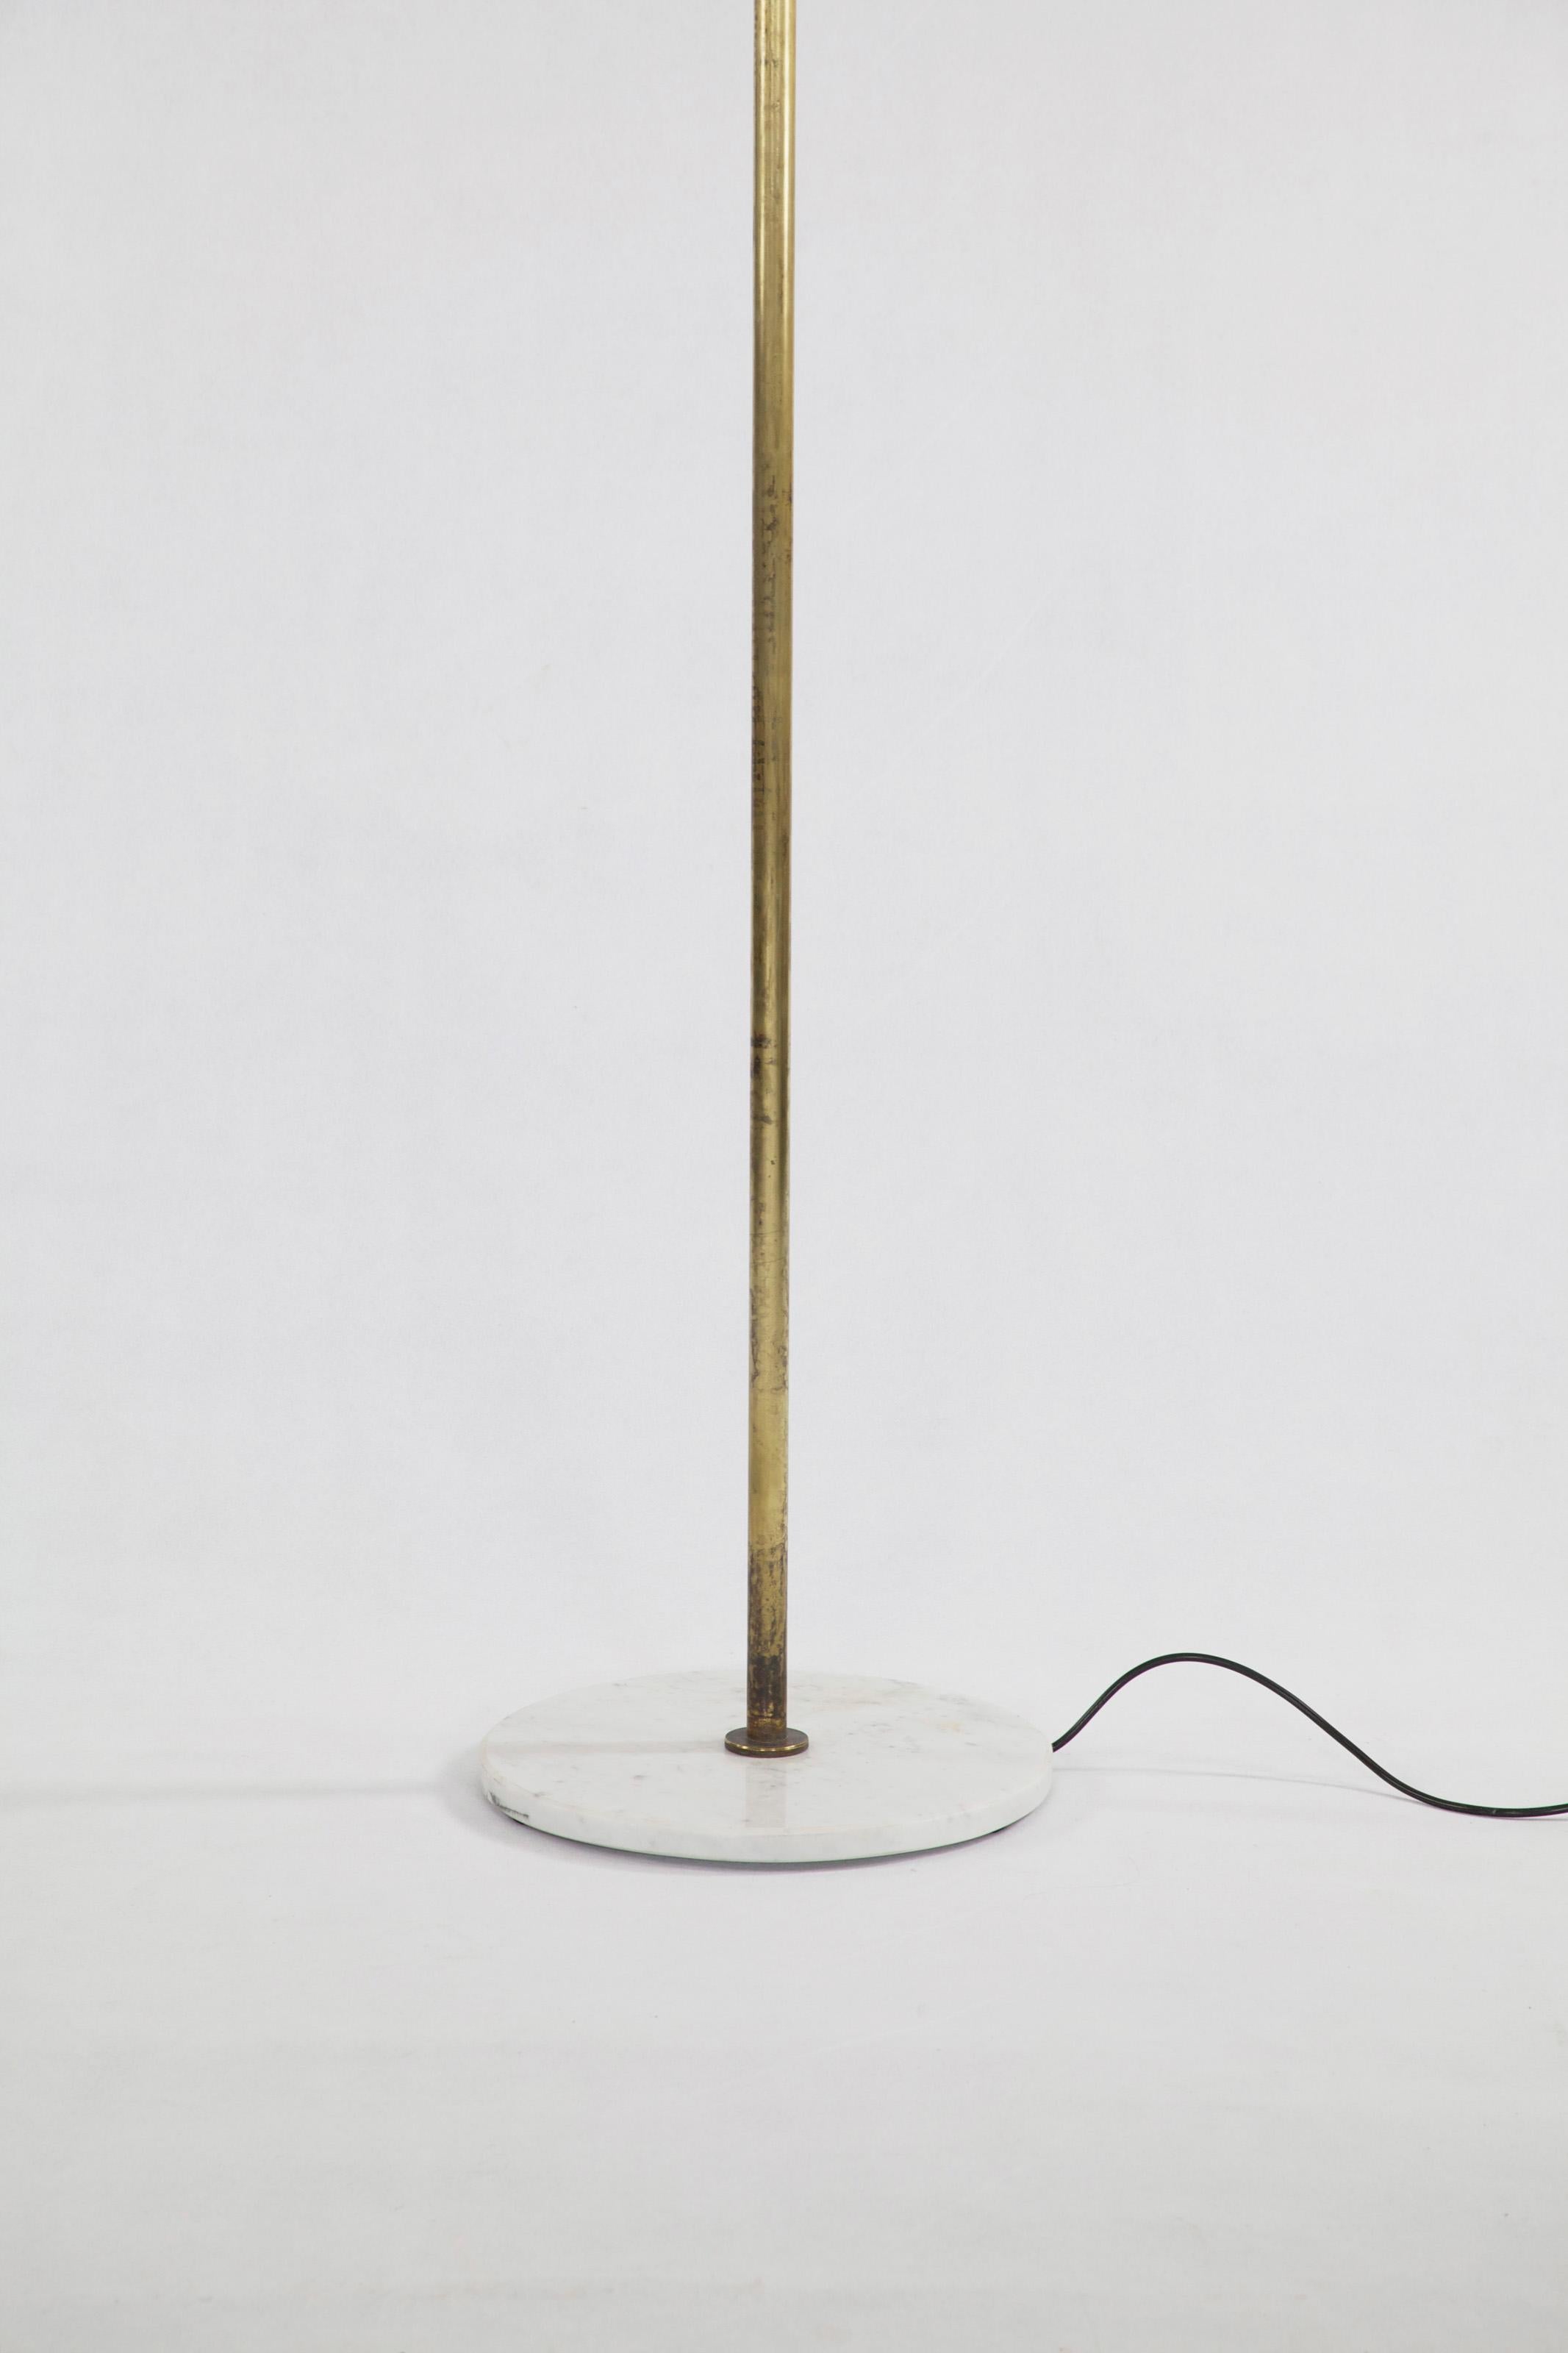 Italian Floor Lamp with Red White Black Colored Metal Shades, Marble Base, 1950s For Sale 6